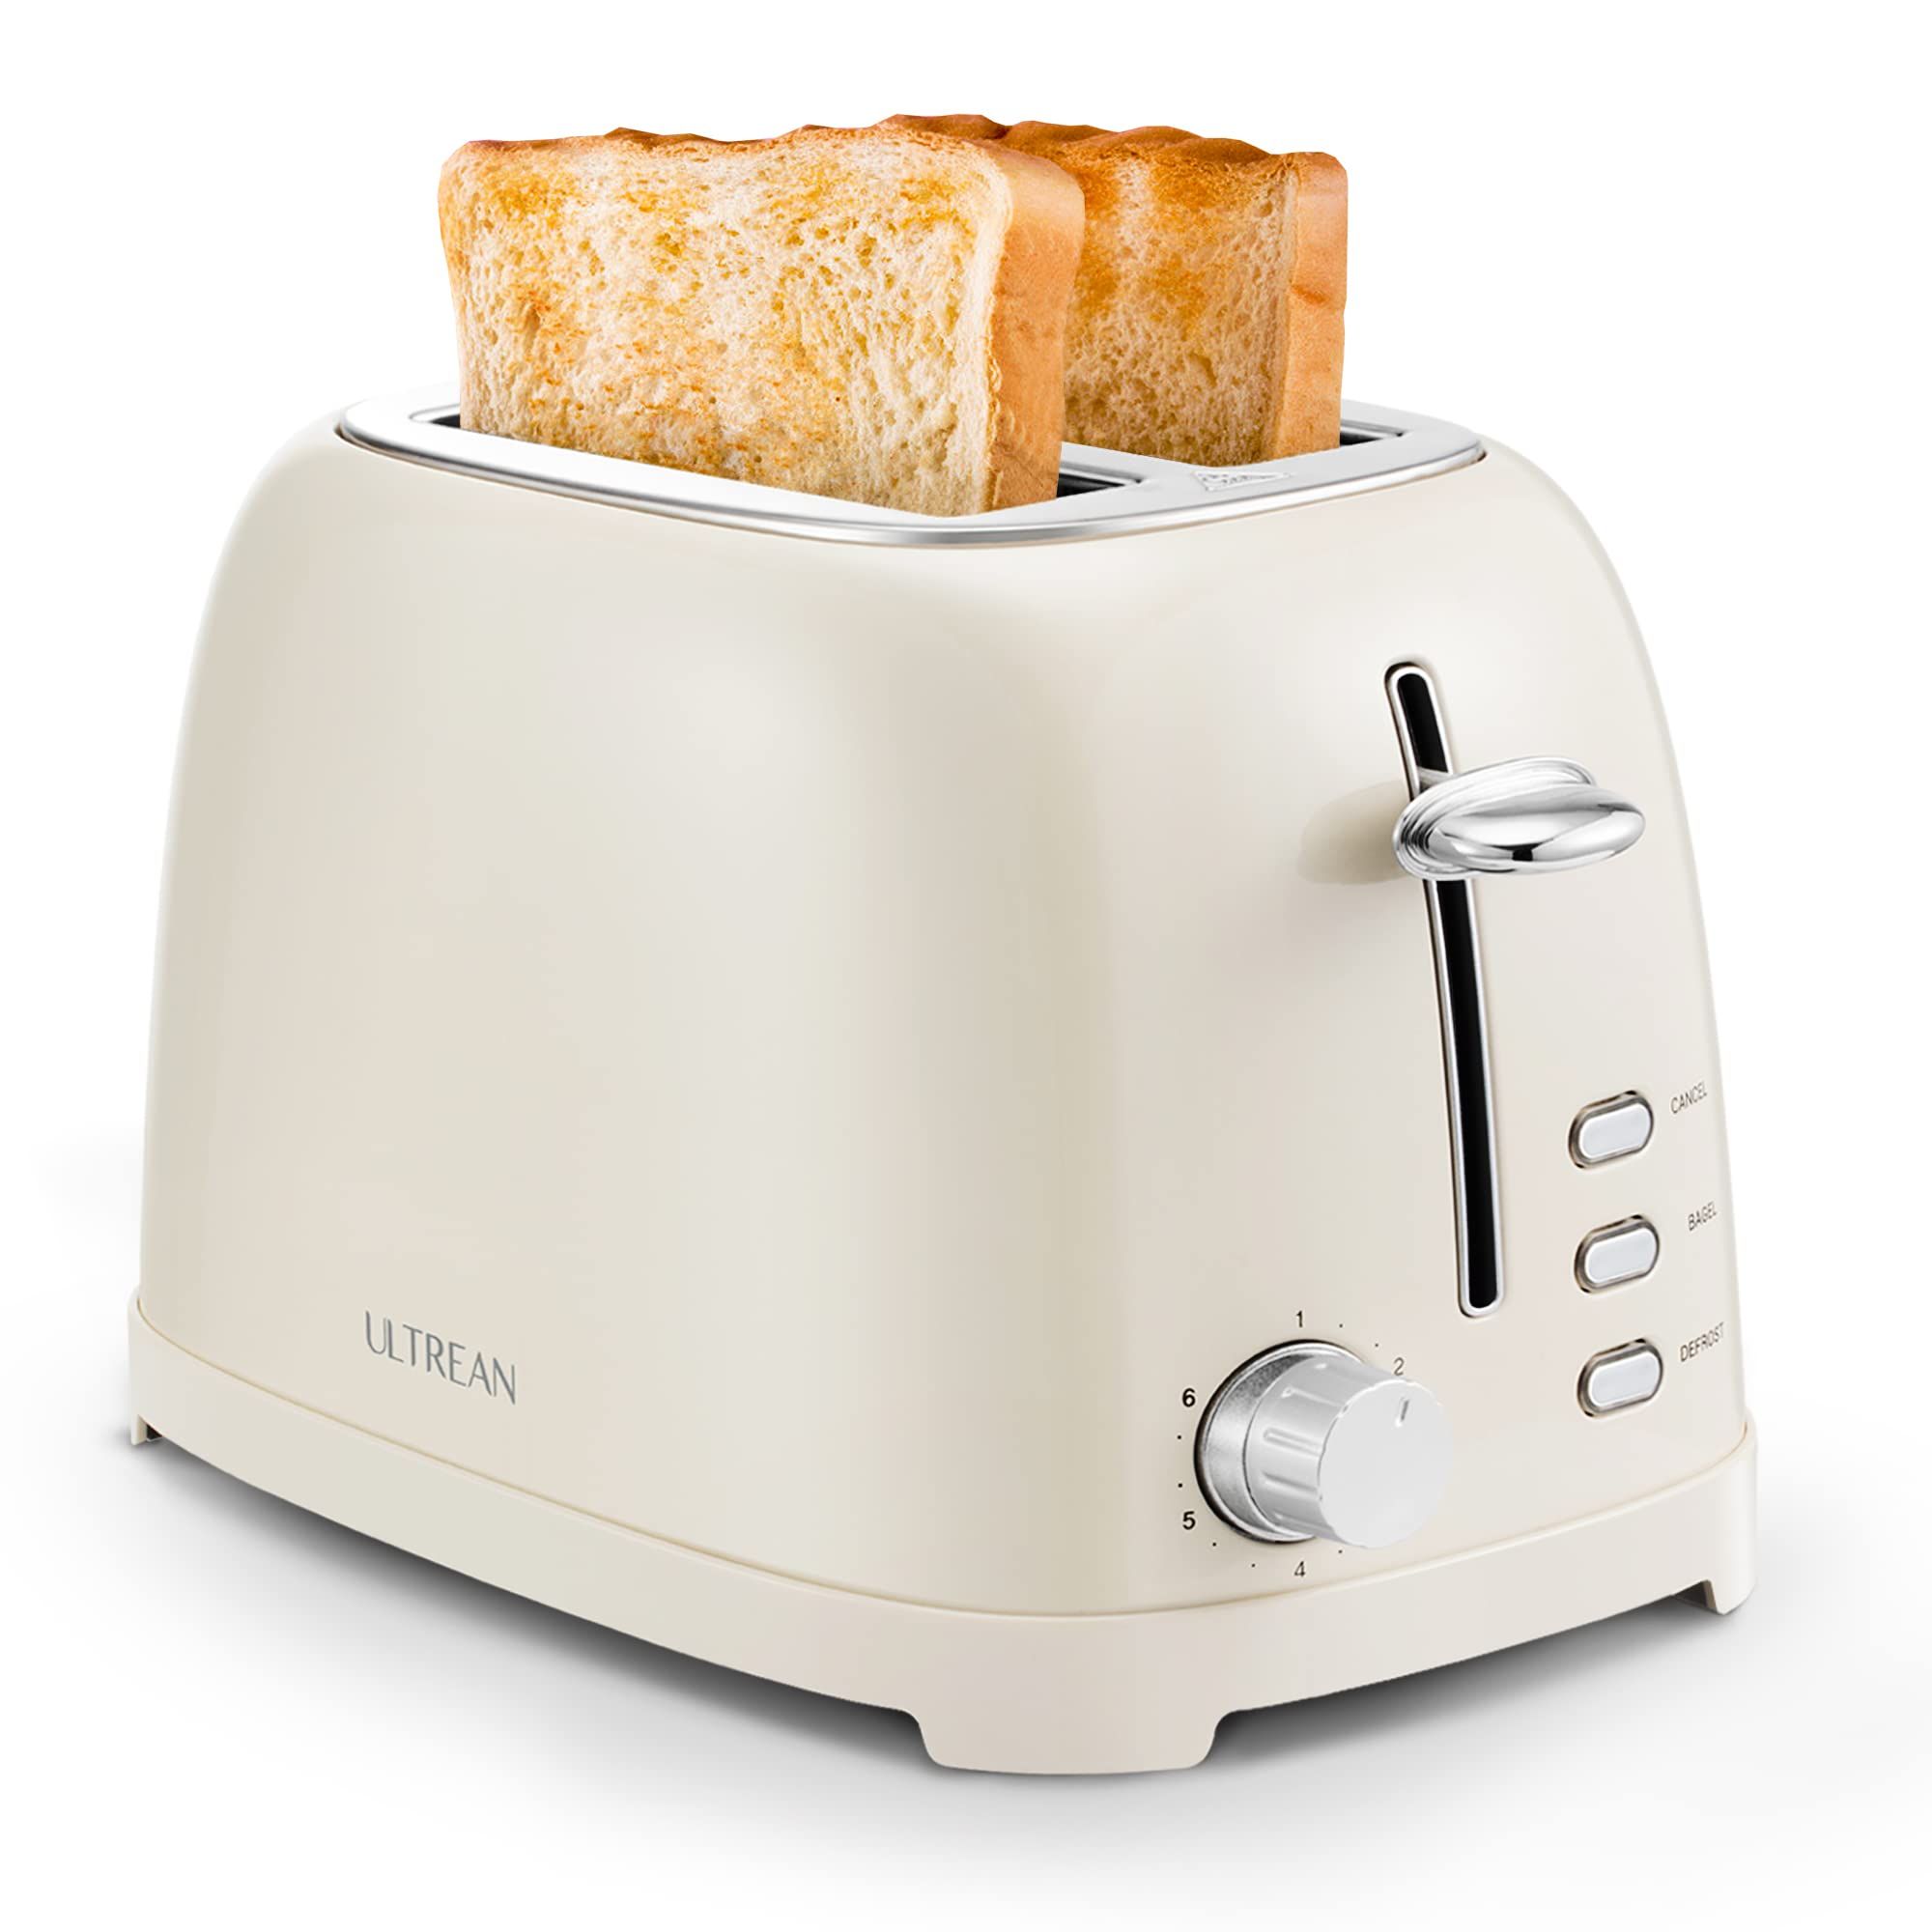 Ultrean Toaster 2 Slice with Extra-Wide Slot, Stainless Steel Toaster with Removable Crumb Tray, ... | Amazon (US)